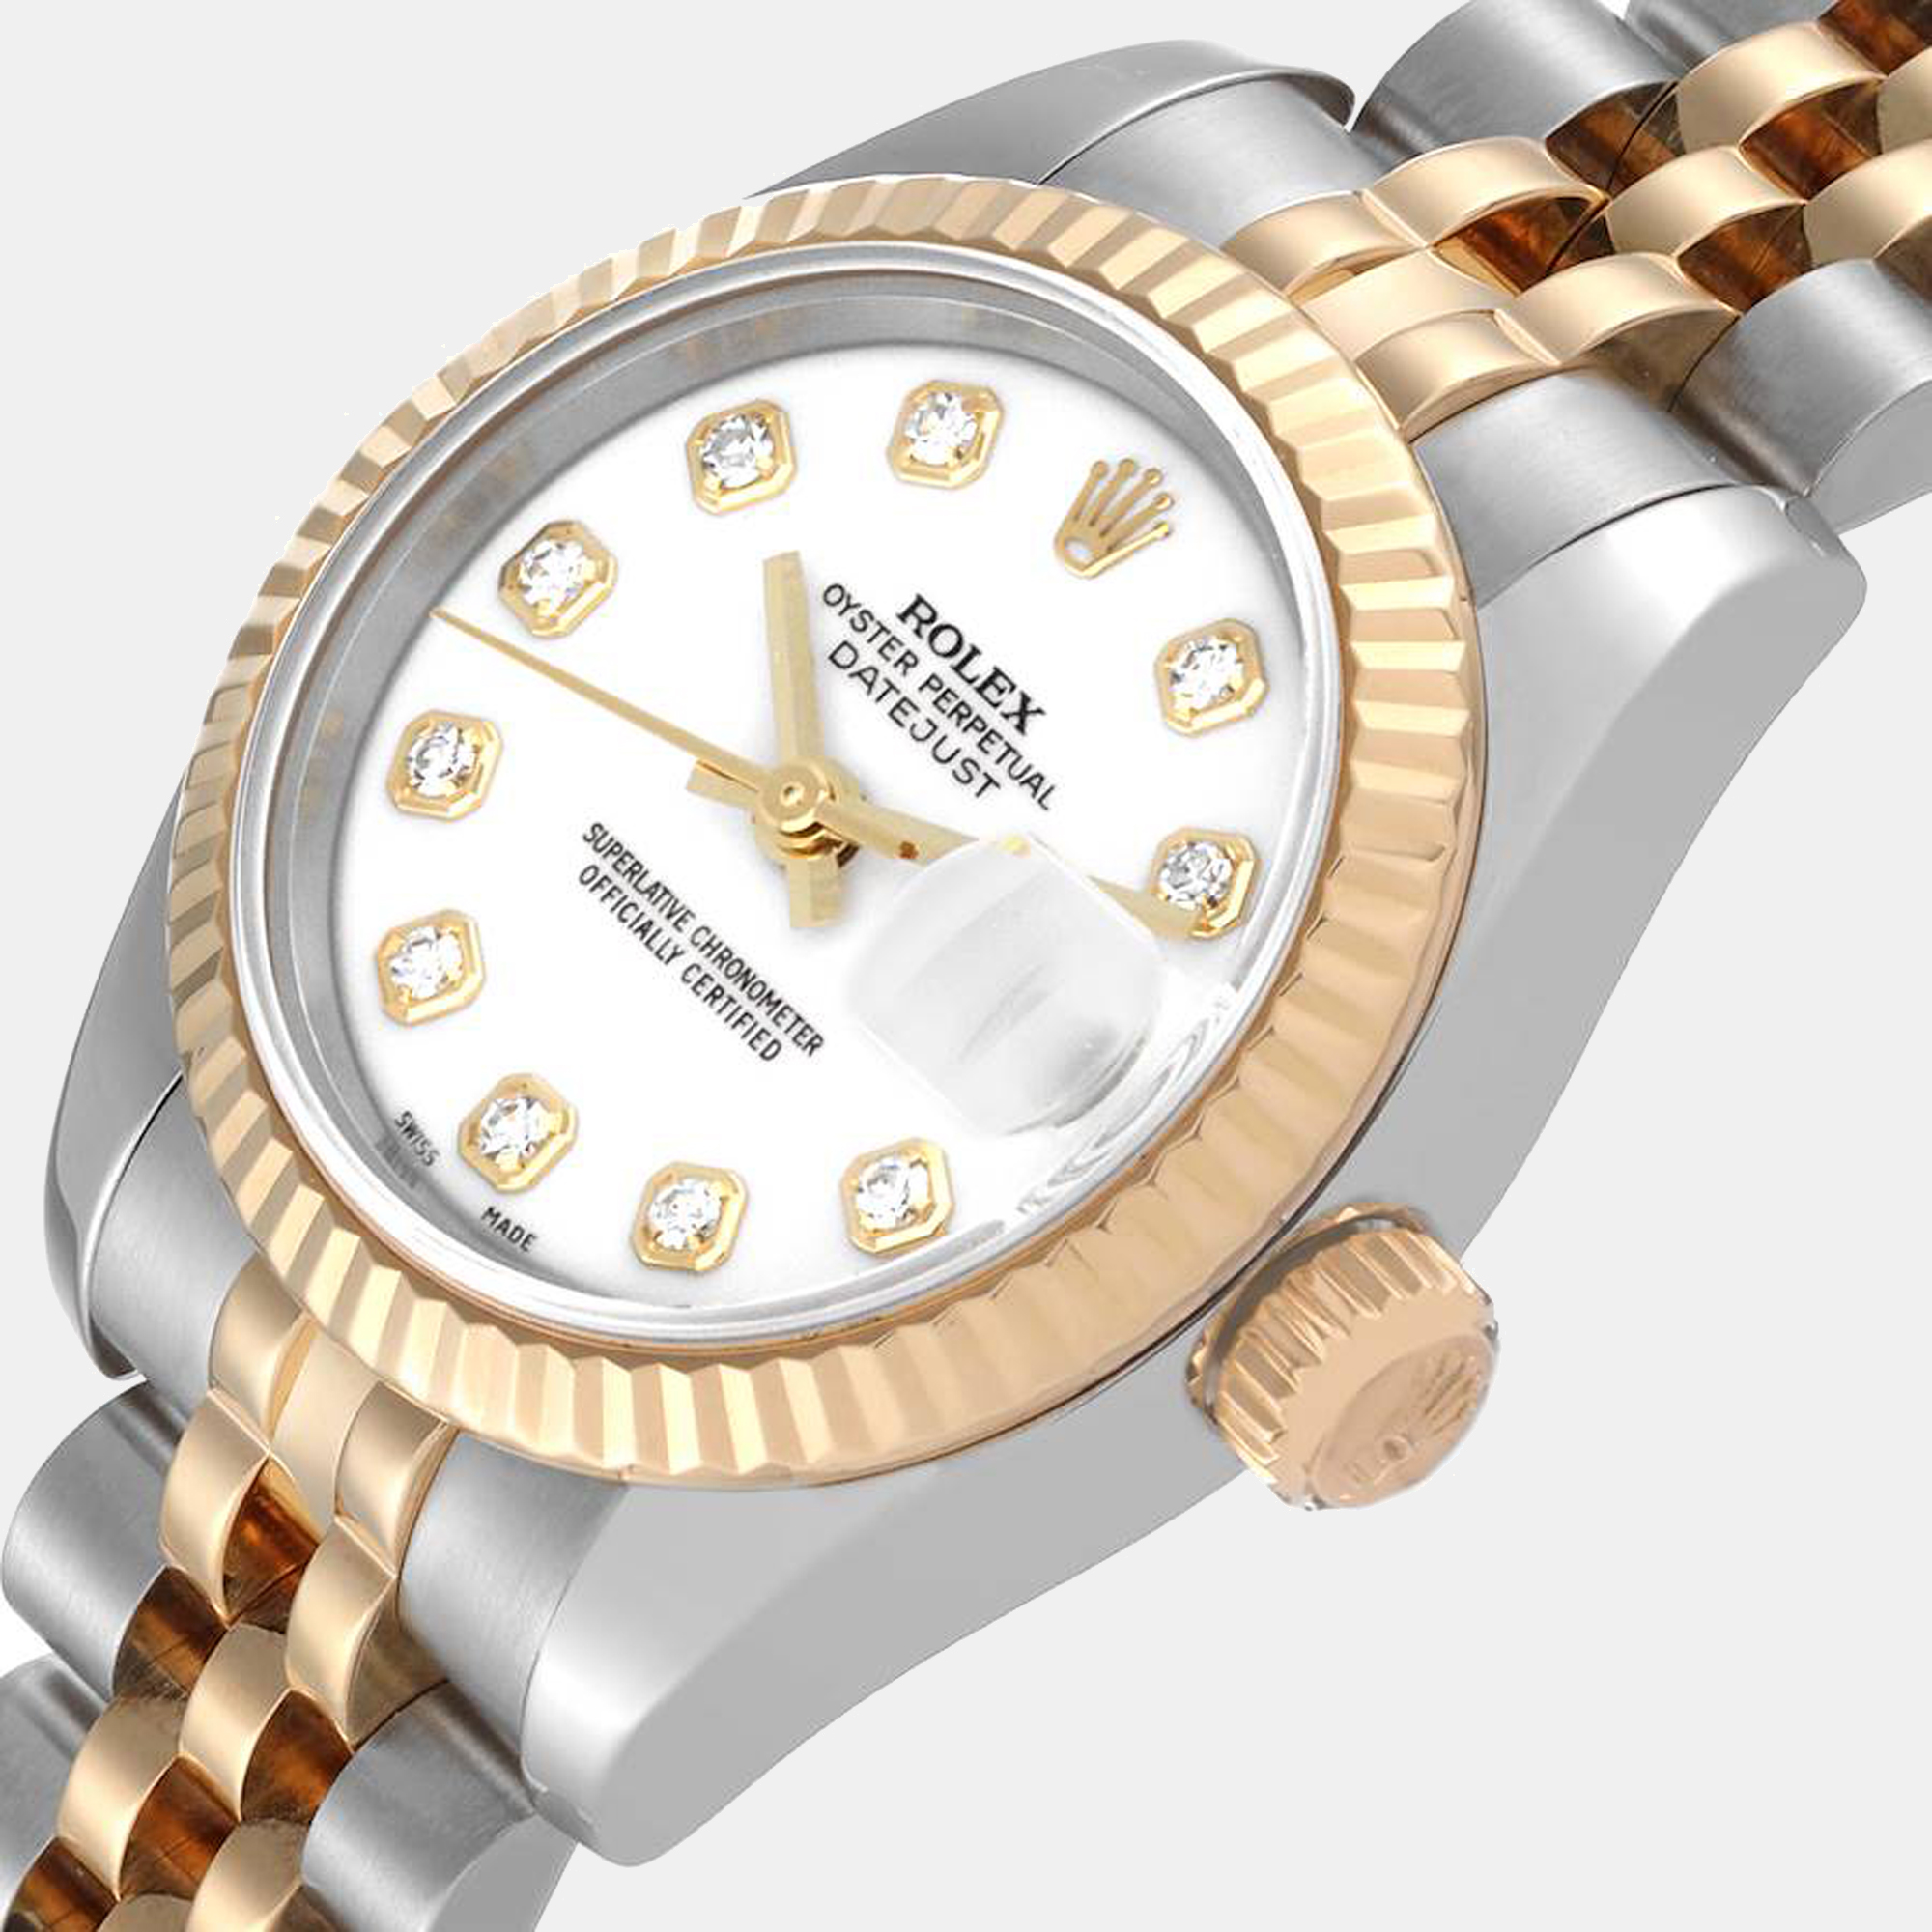 

Rolex White Diamonds 18K Yellow Gold And Stainless Steel Datejust 179173 Women's Wristwatch 26 mm